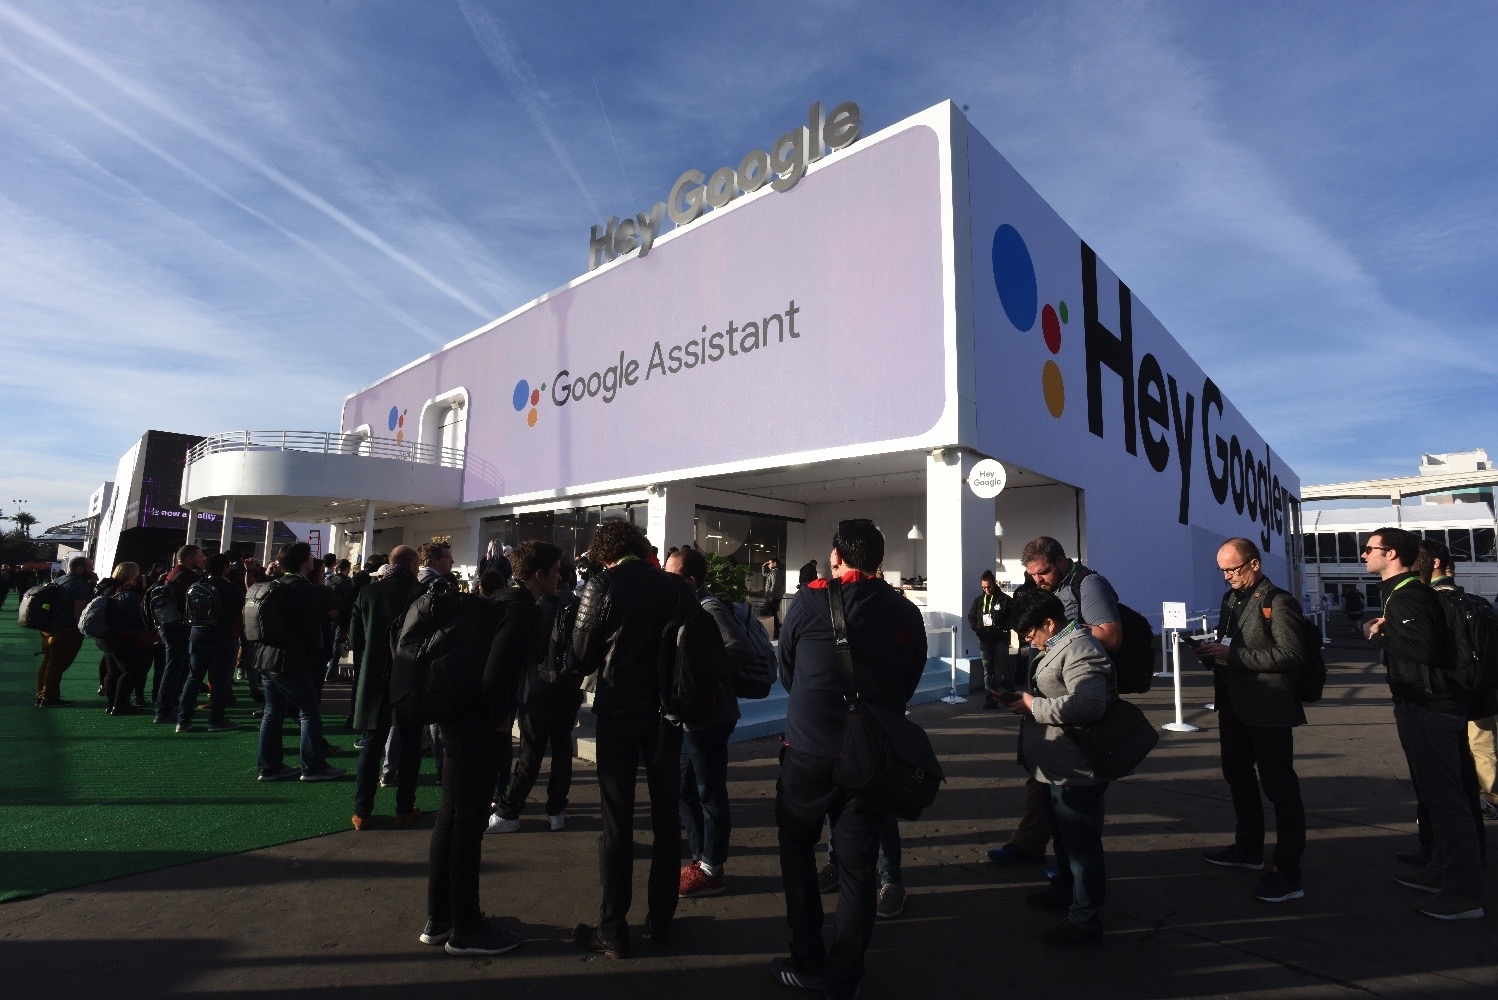 CES 2019: In pictures | DeviceDaily.com